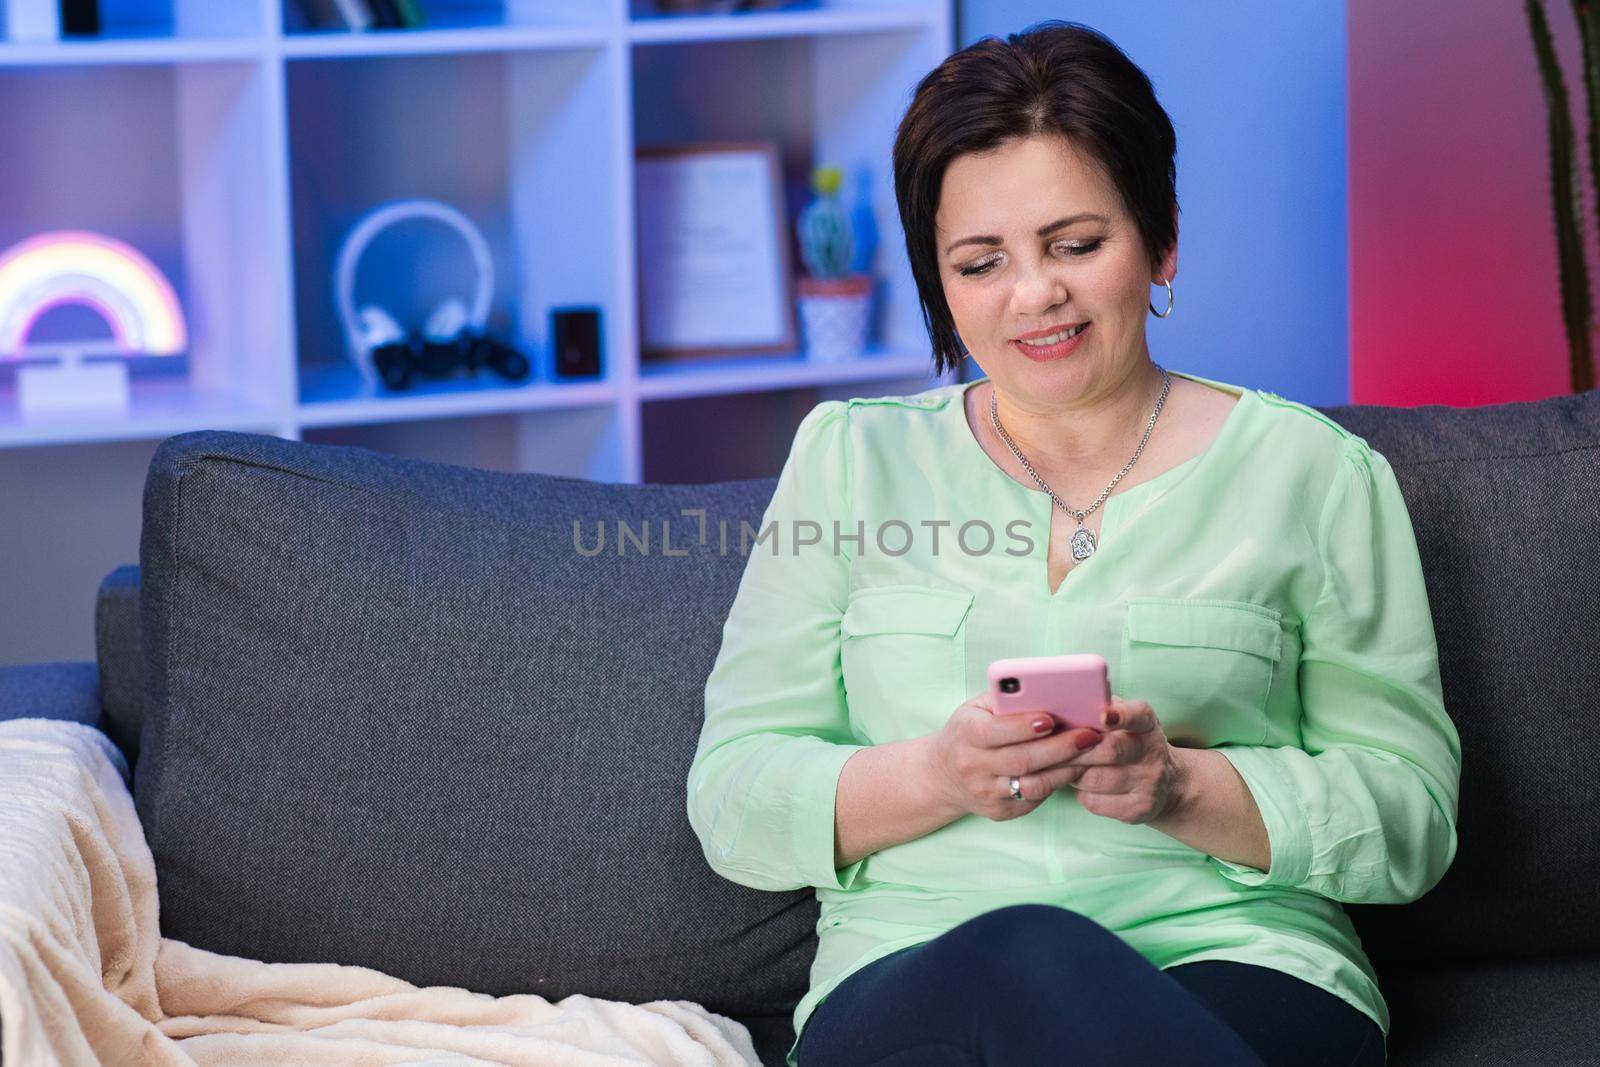 Caucasian Woman with Short Black Hair Sitting on Couch at Home, Holding Invisible Smartphone in Hand and Chatting with Someone